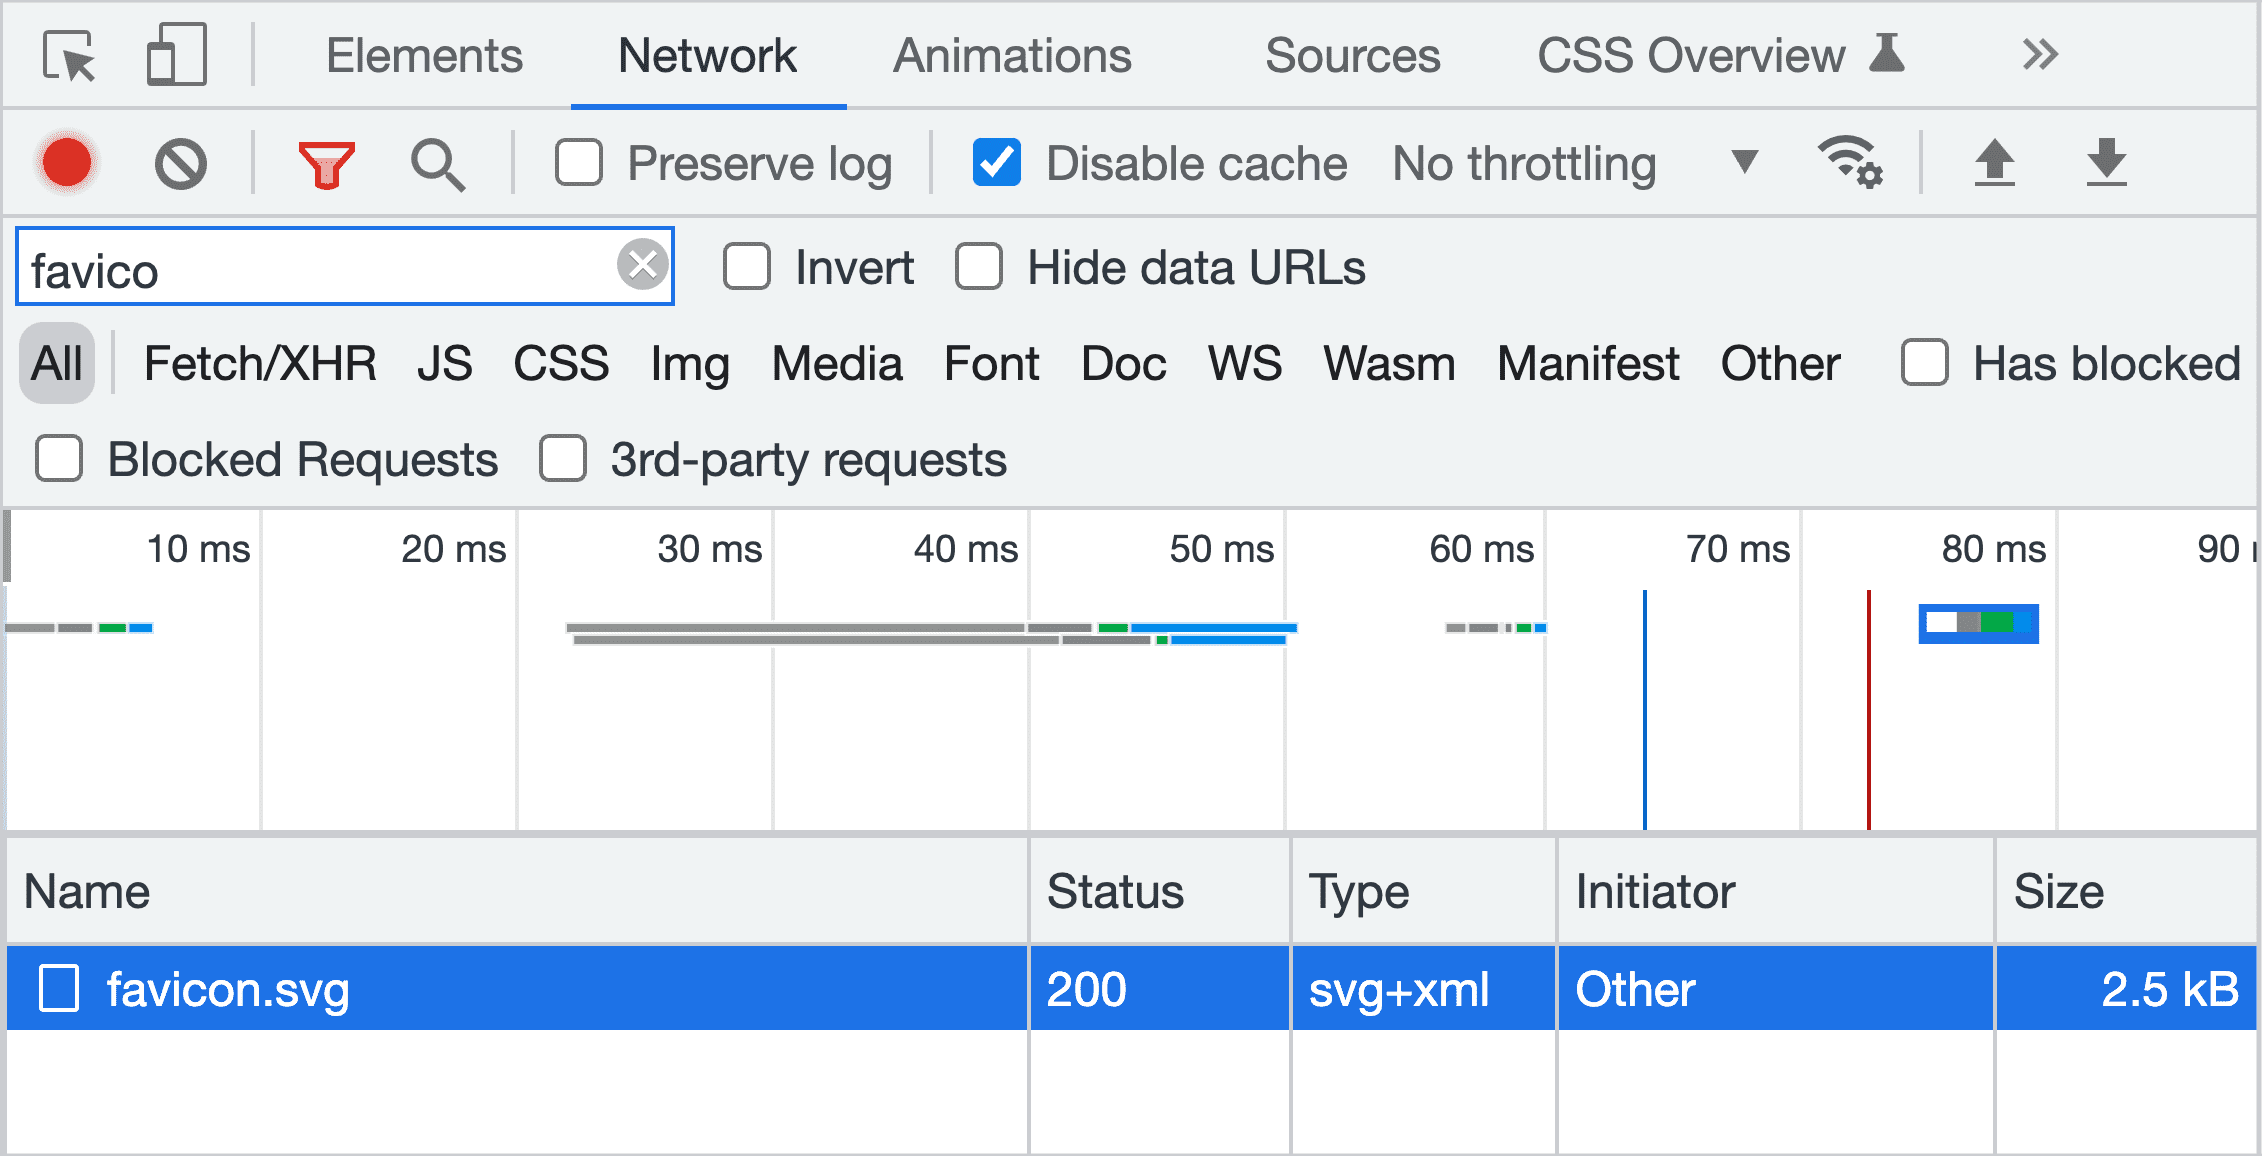 Screenshot of the Network pane from DevTools with a filter searched for
favicon and the favicon.svg resource highlighted.